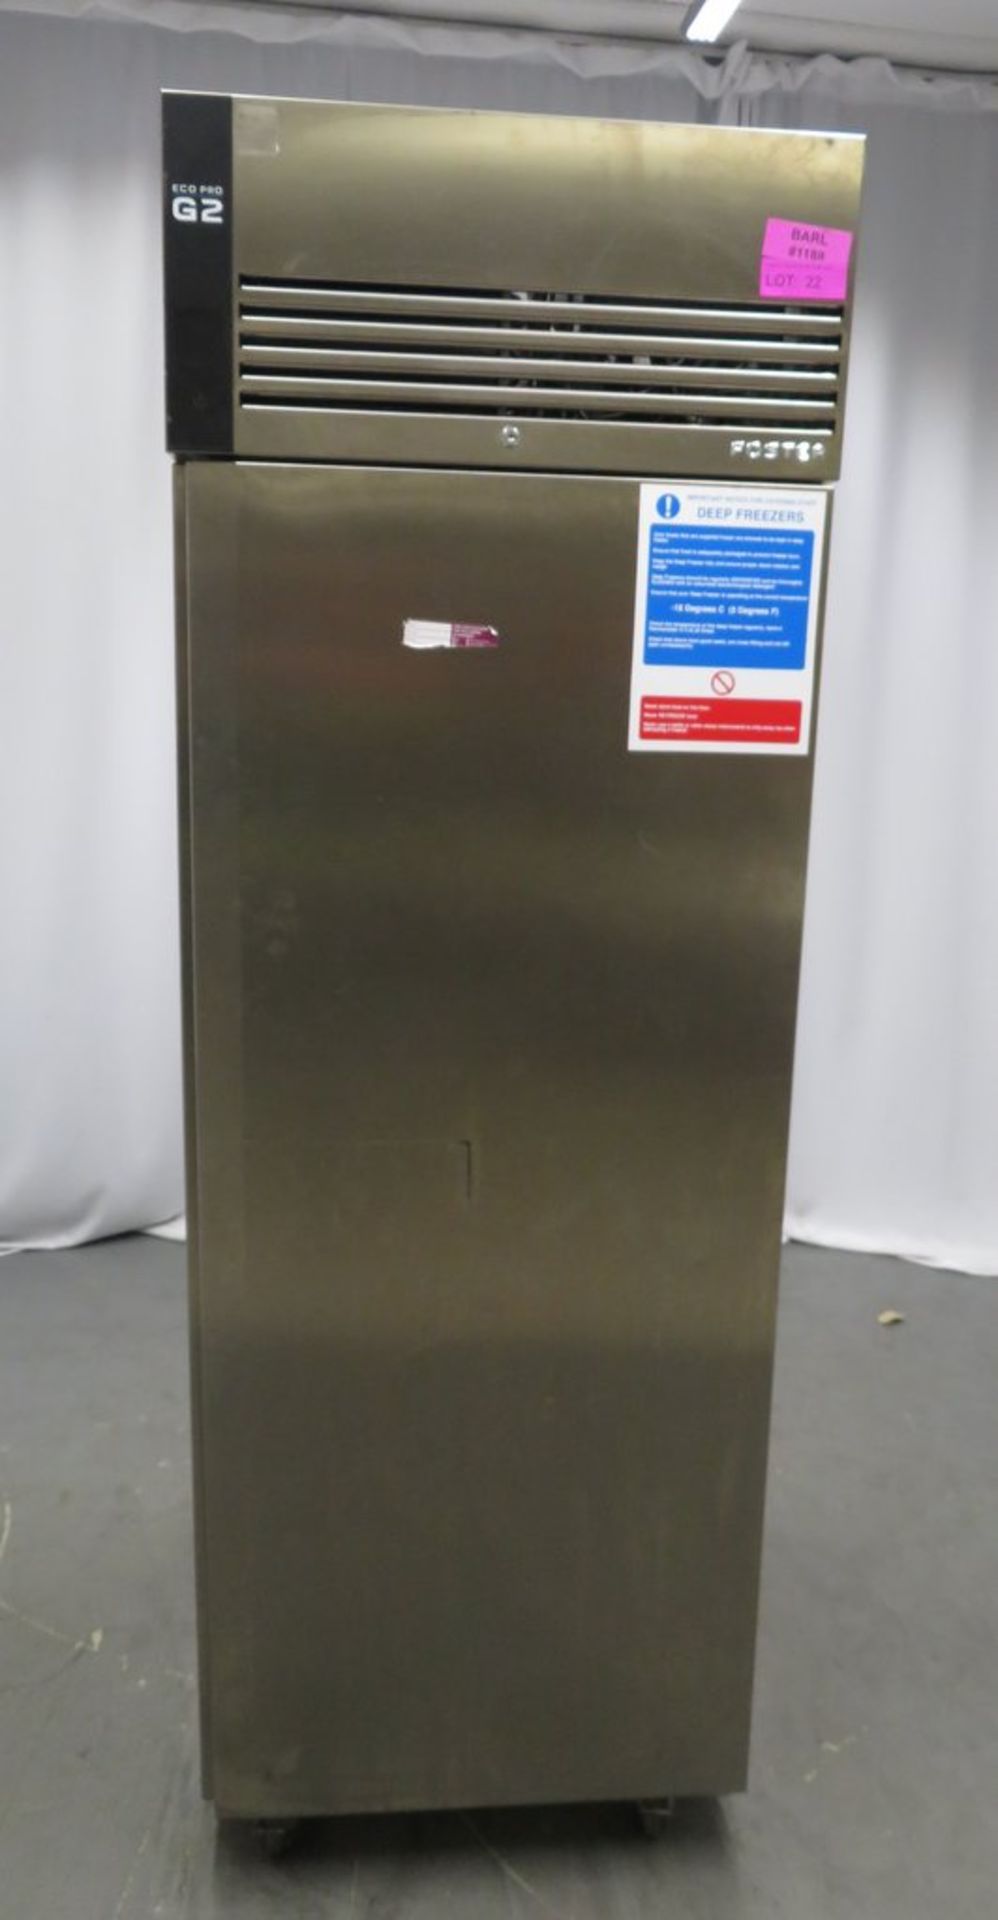 Foster ECO PRO G2 EP700L single door upright freezer, 1 phase electric